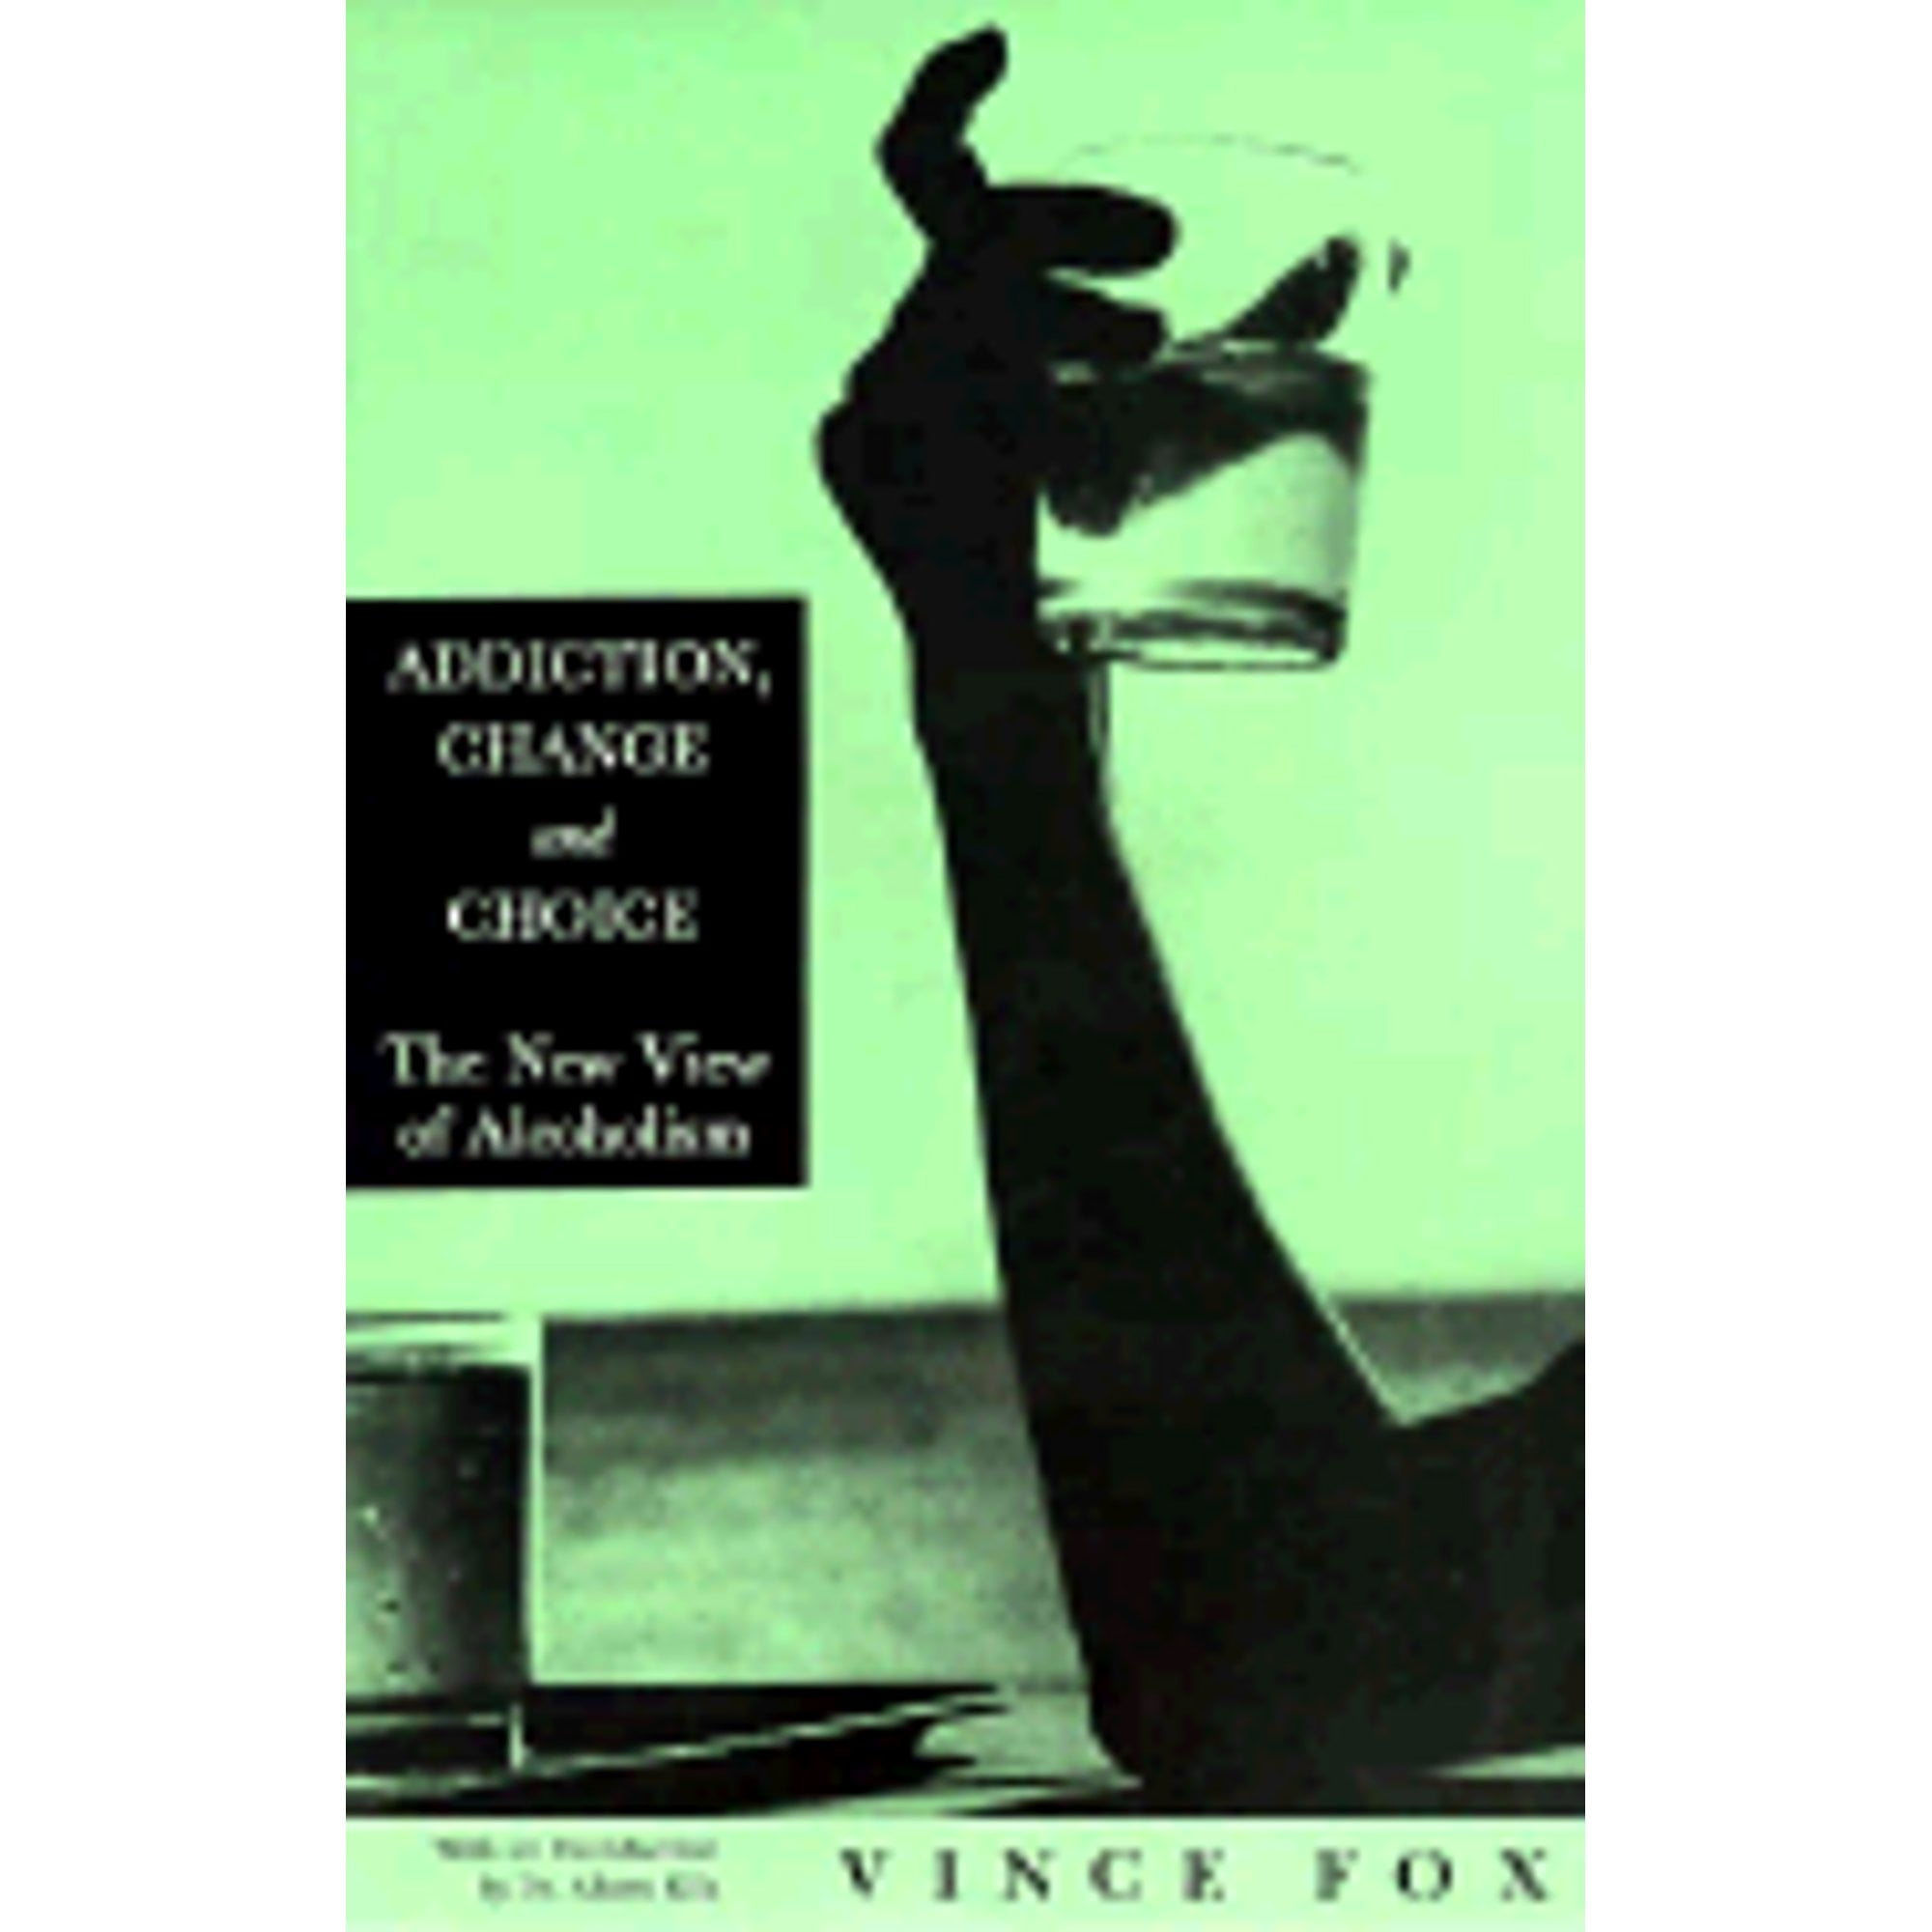 Pre-Owned Addiction, Change  Choice: The New View of Alcoholism Paperback Vince Fox